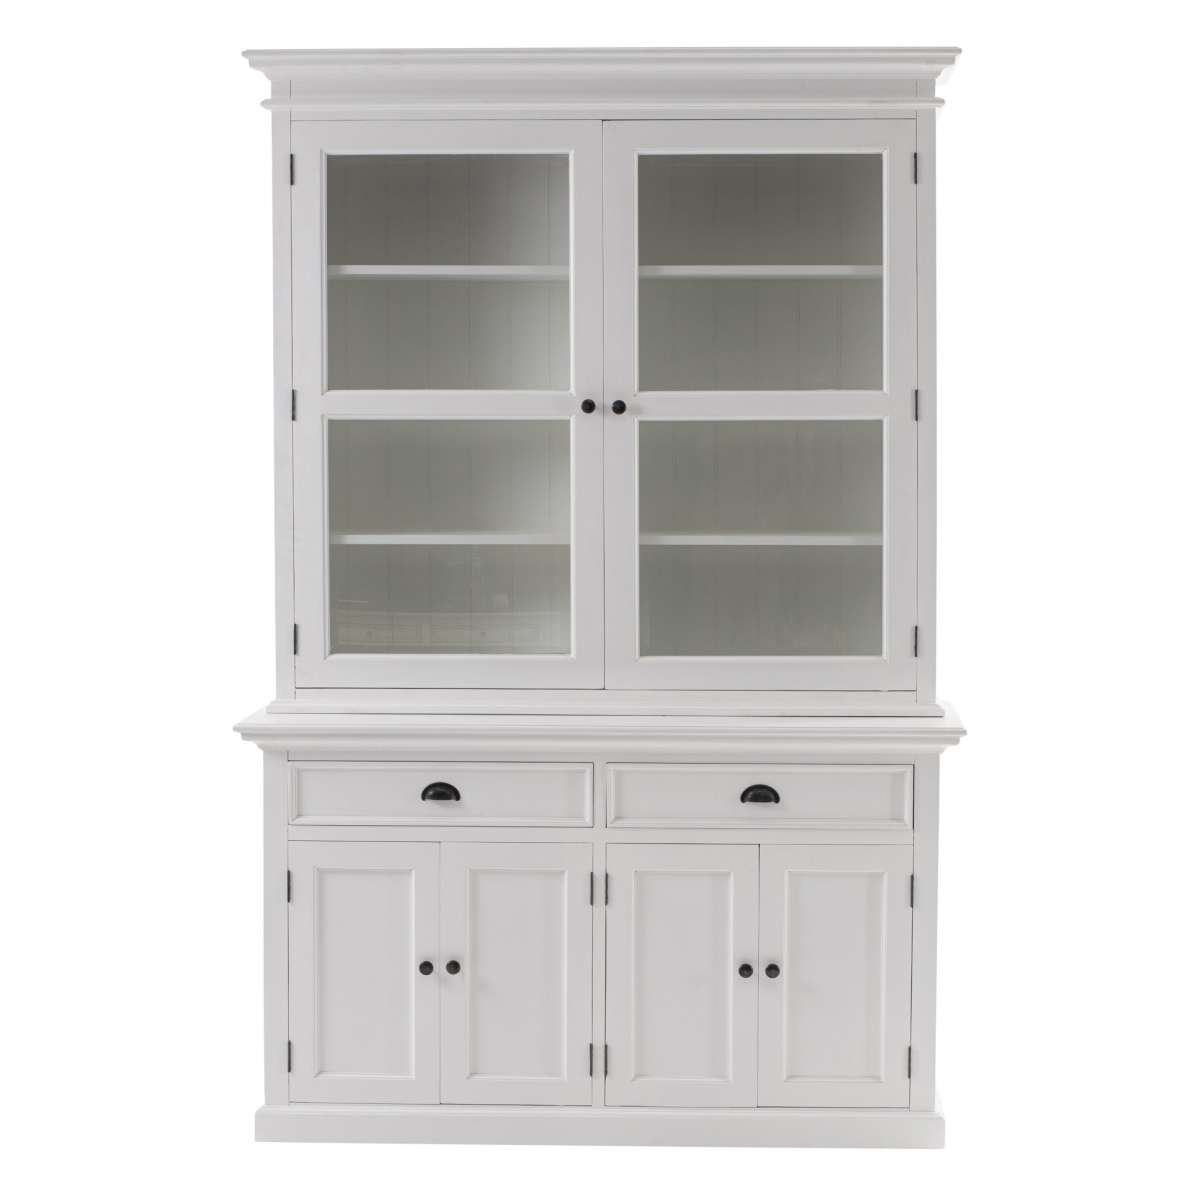 Picture of HomeRoots 397834 86.61 x 57.09 x 19.69 in. Classic White Glass Display Hutch